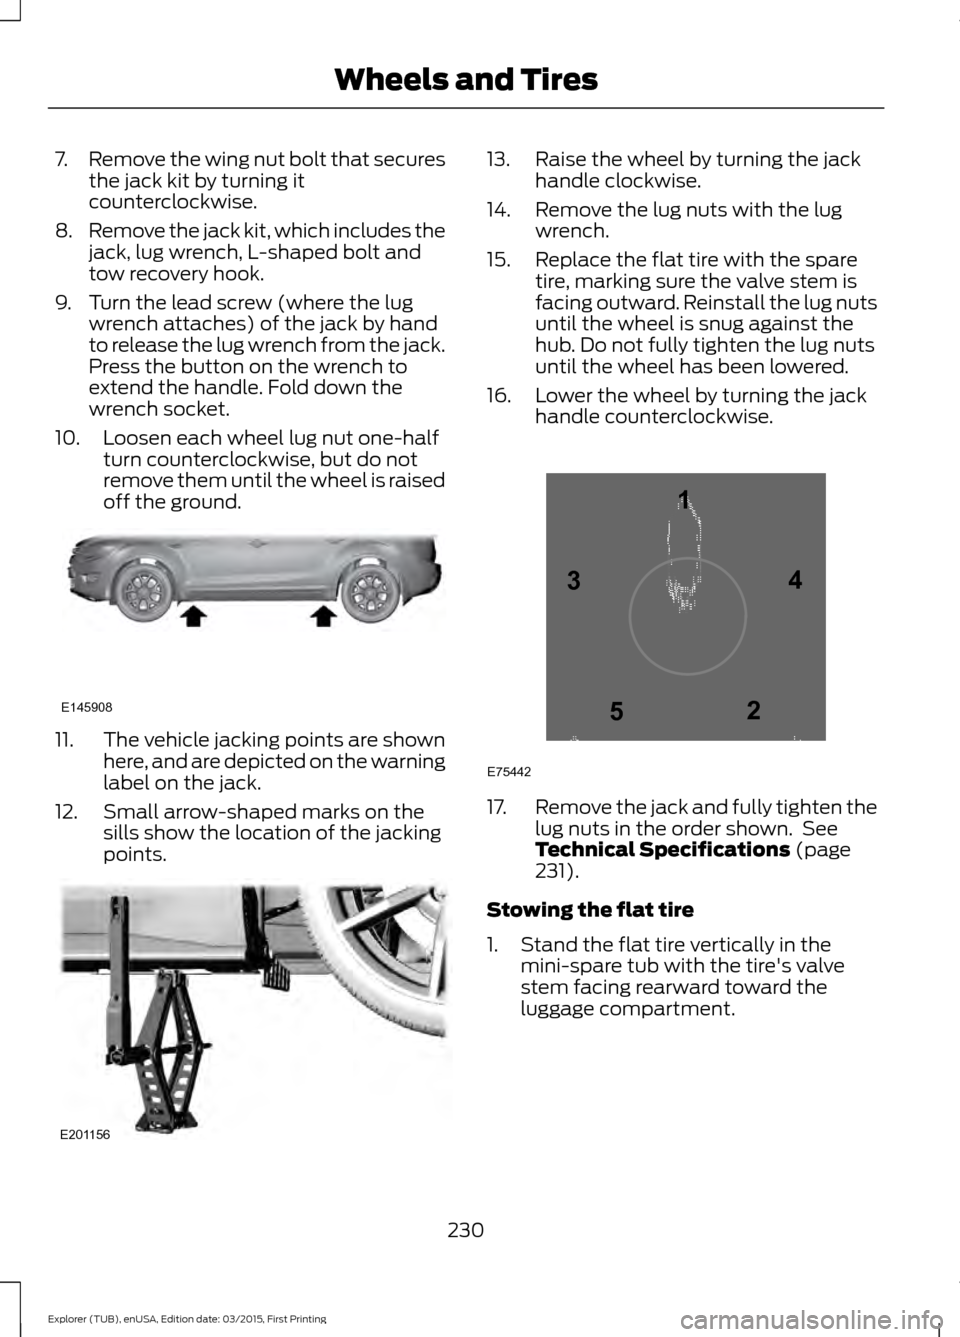 FORD POLICE INTERCEPTOR UTILITY 2016 1.G Owners Manual 7.
Remove the wing nut bolt that secures
the jack kit by turning it
counterclockwise.
8. Remove the jack kit, which includes the
jack, lug wrench, L-shaped bolt and
tow recovery hook.
9. Turn the lead